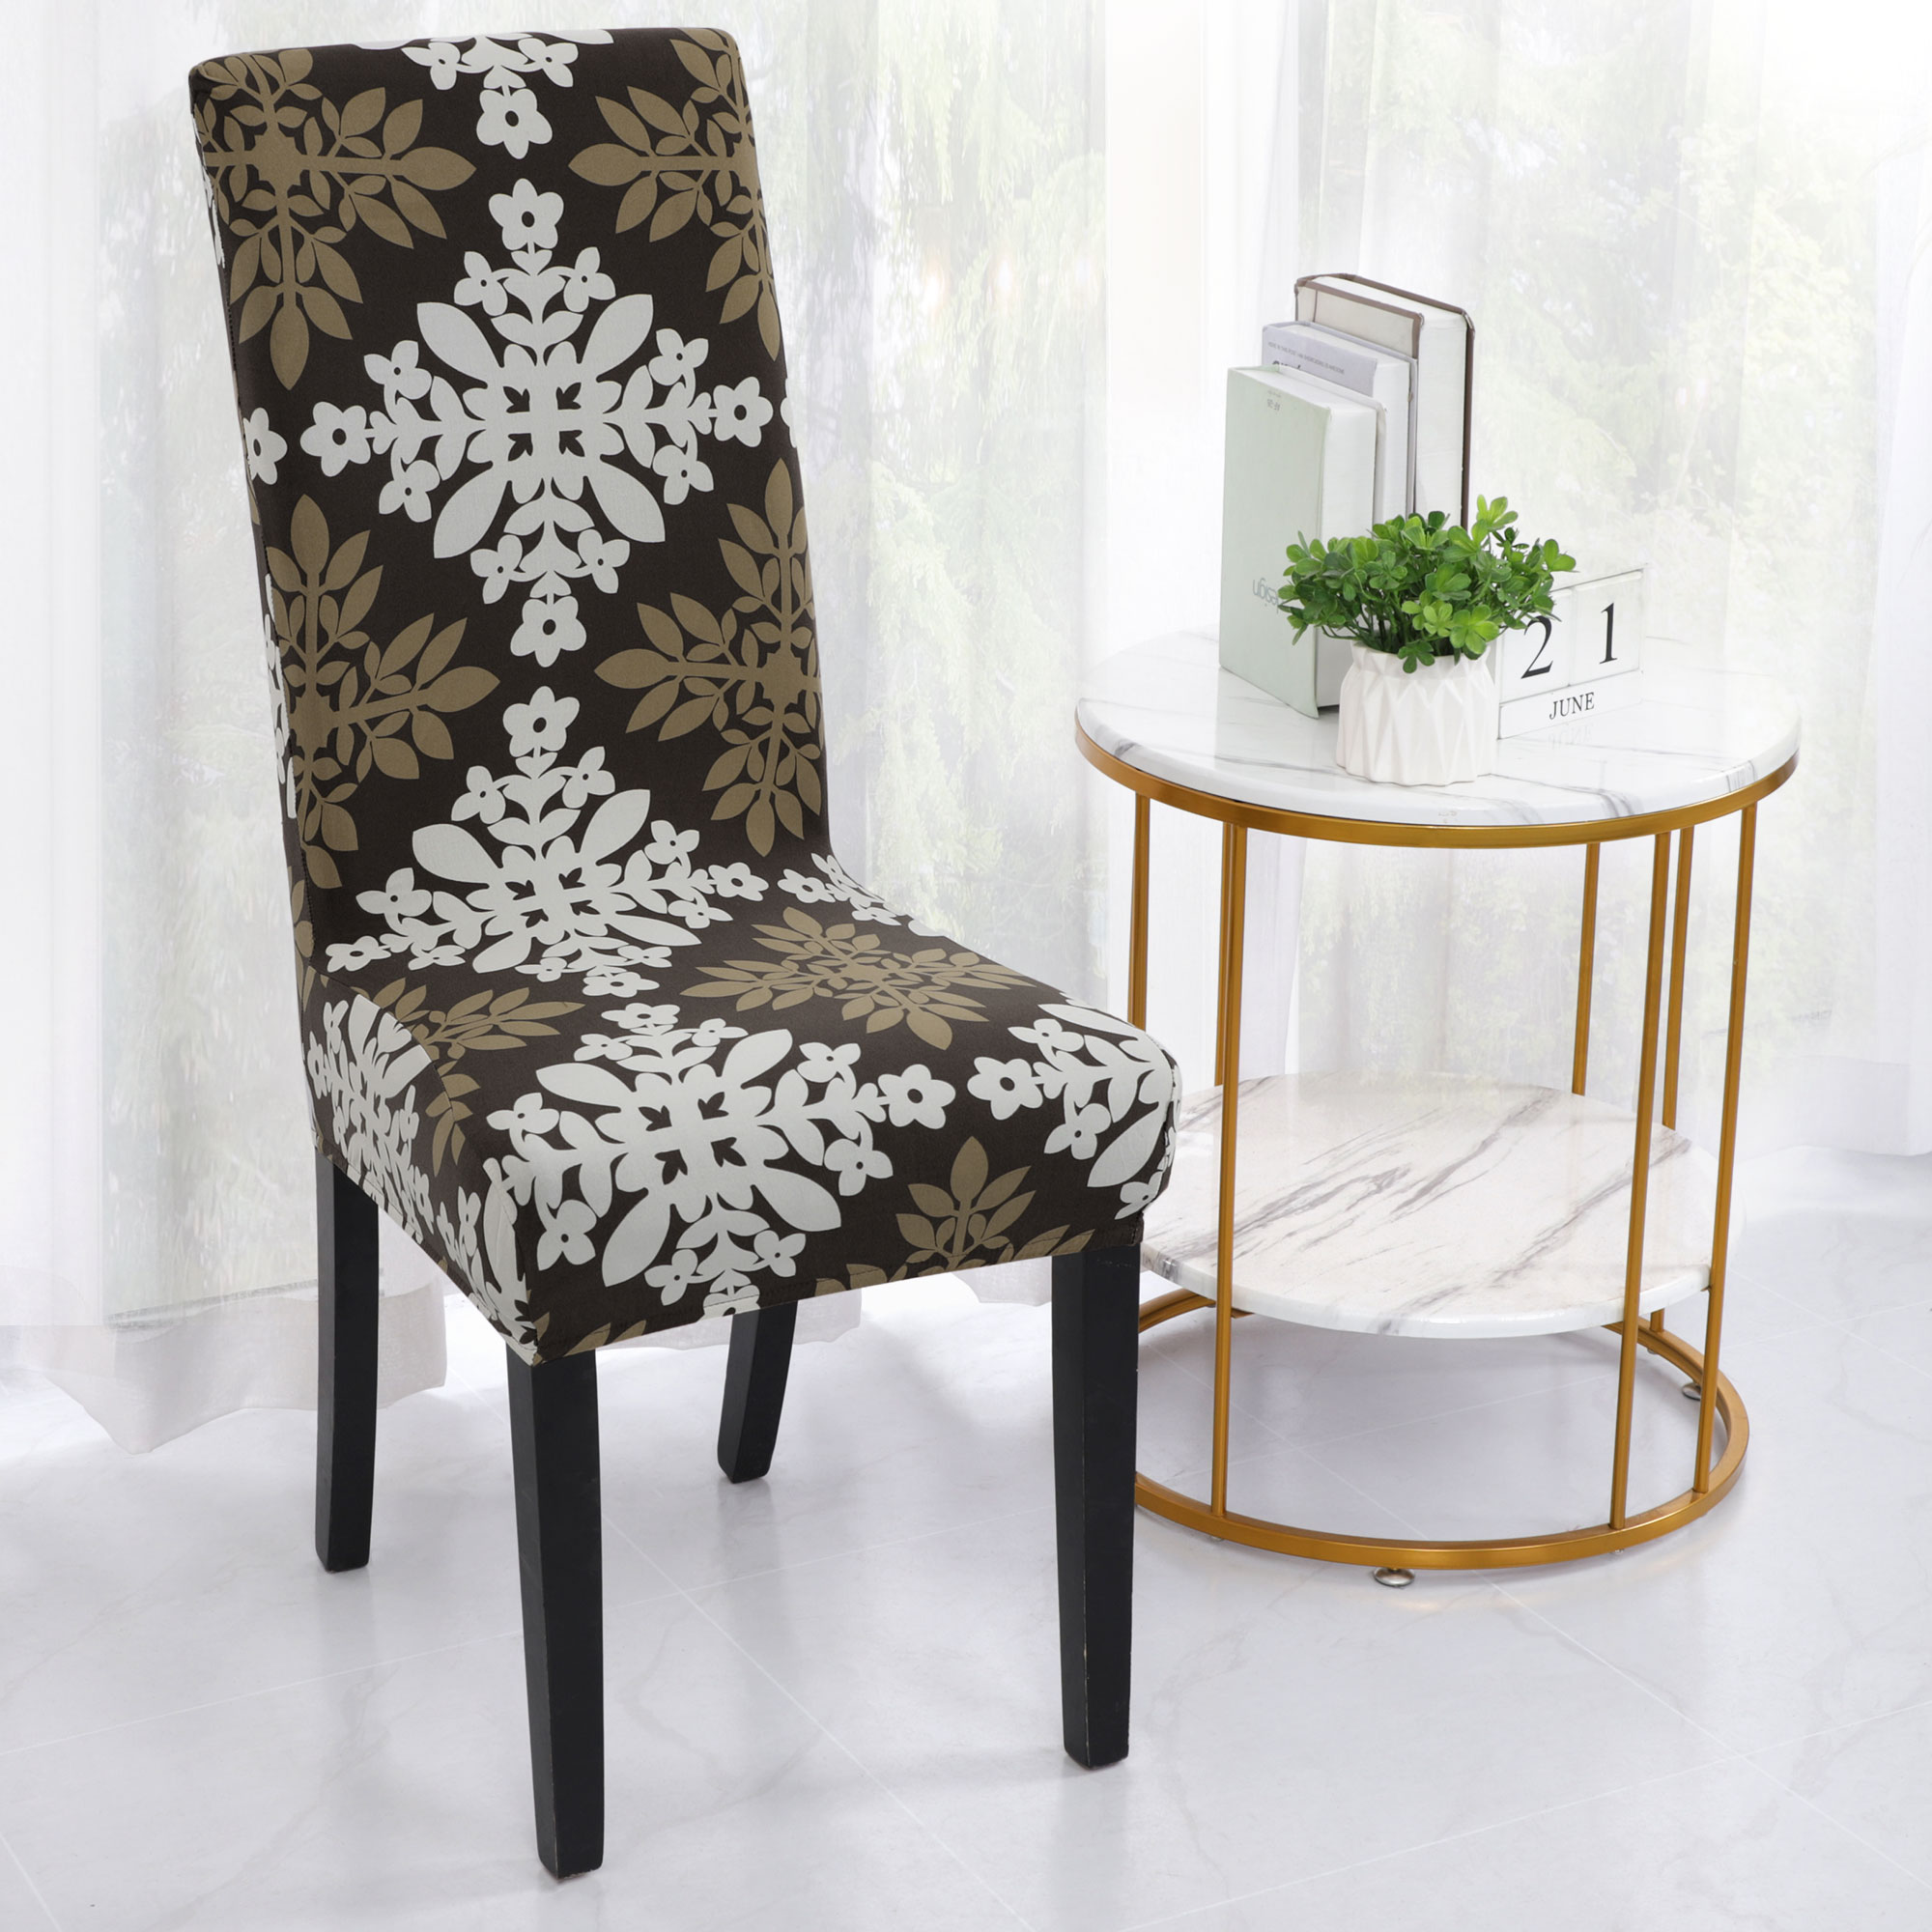 Unique Bargains Dining Chair Cover Stretch Stool Slipcover Chair Seat Protector (M,Brown White)